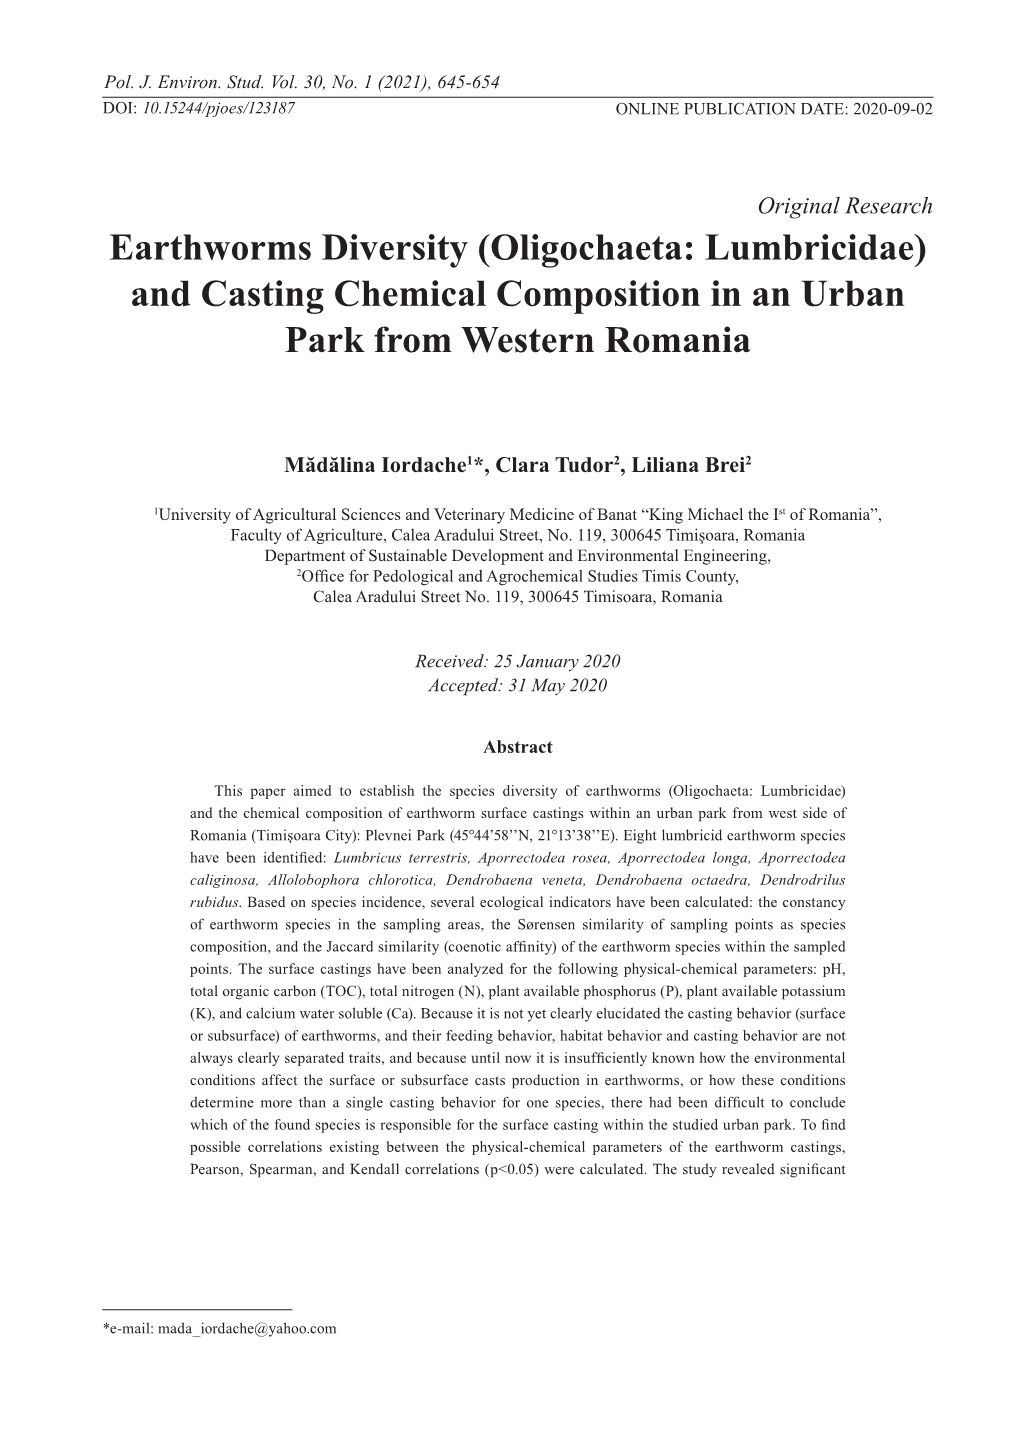 Earthworms Diversity (Oligochaeta: Lumbricidae) and Casting Chemical Composition in an Urban Park from Western Romania